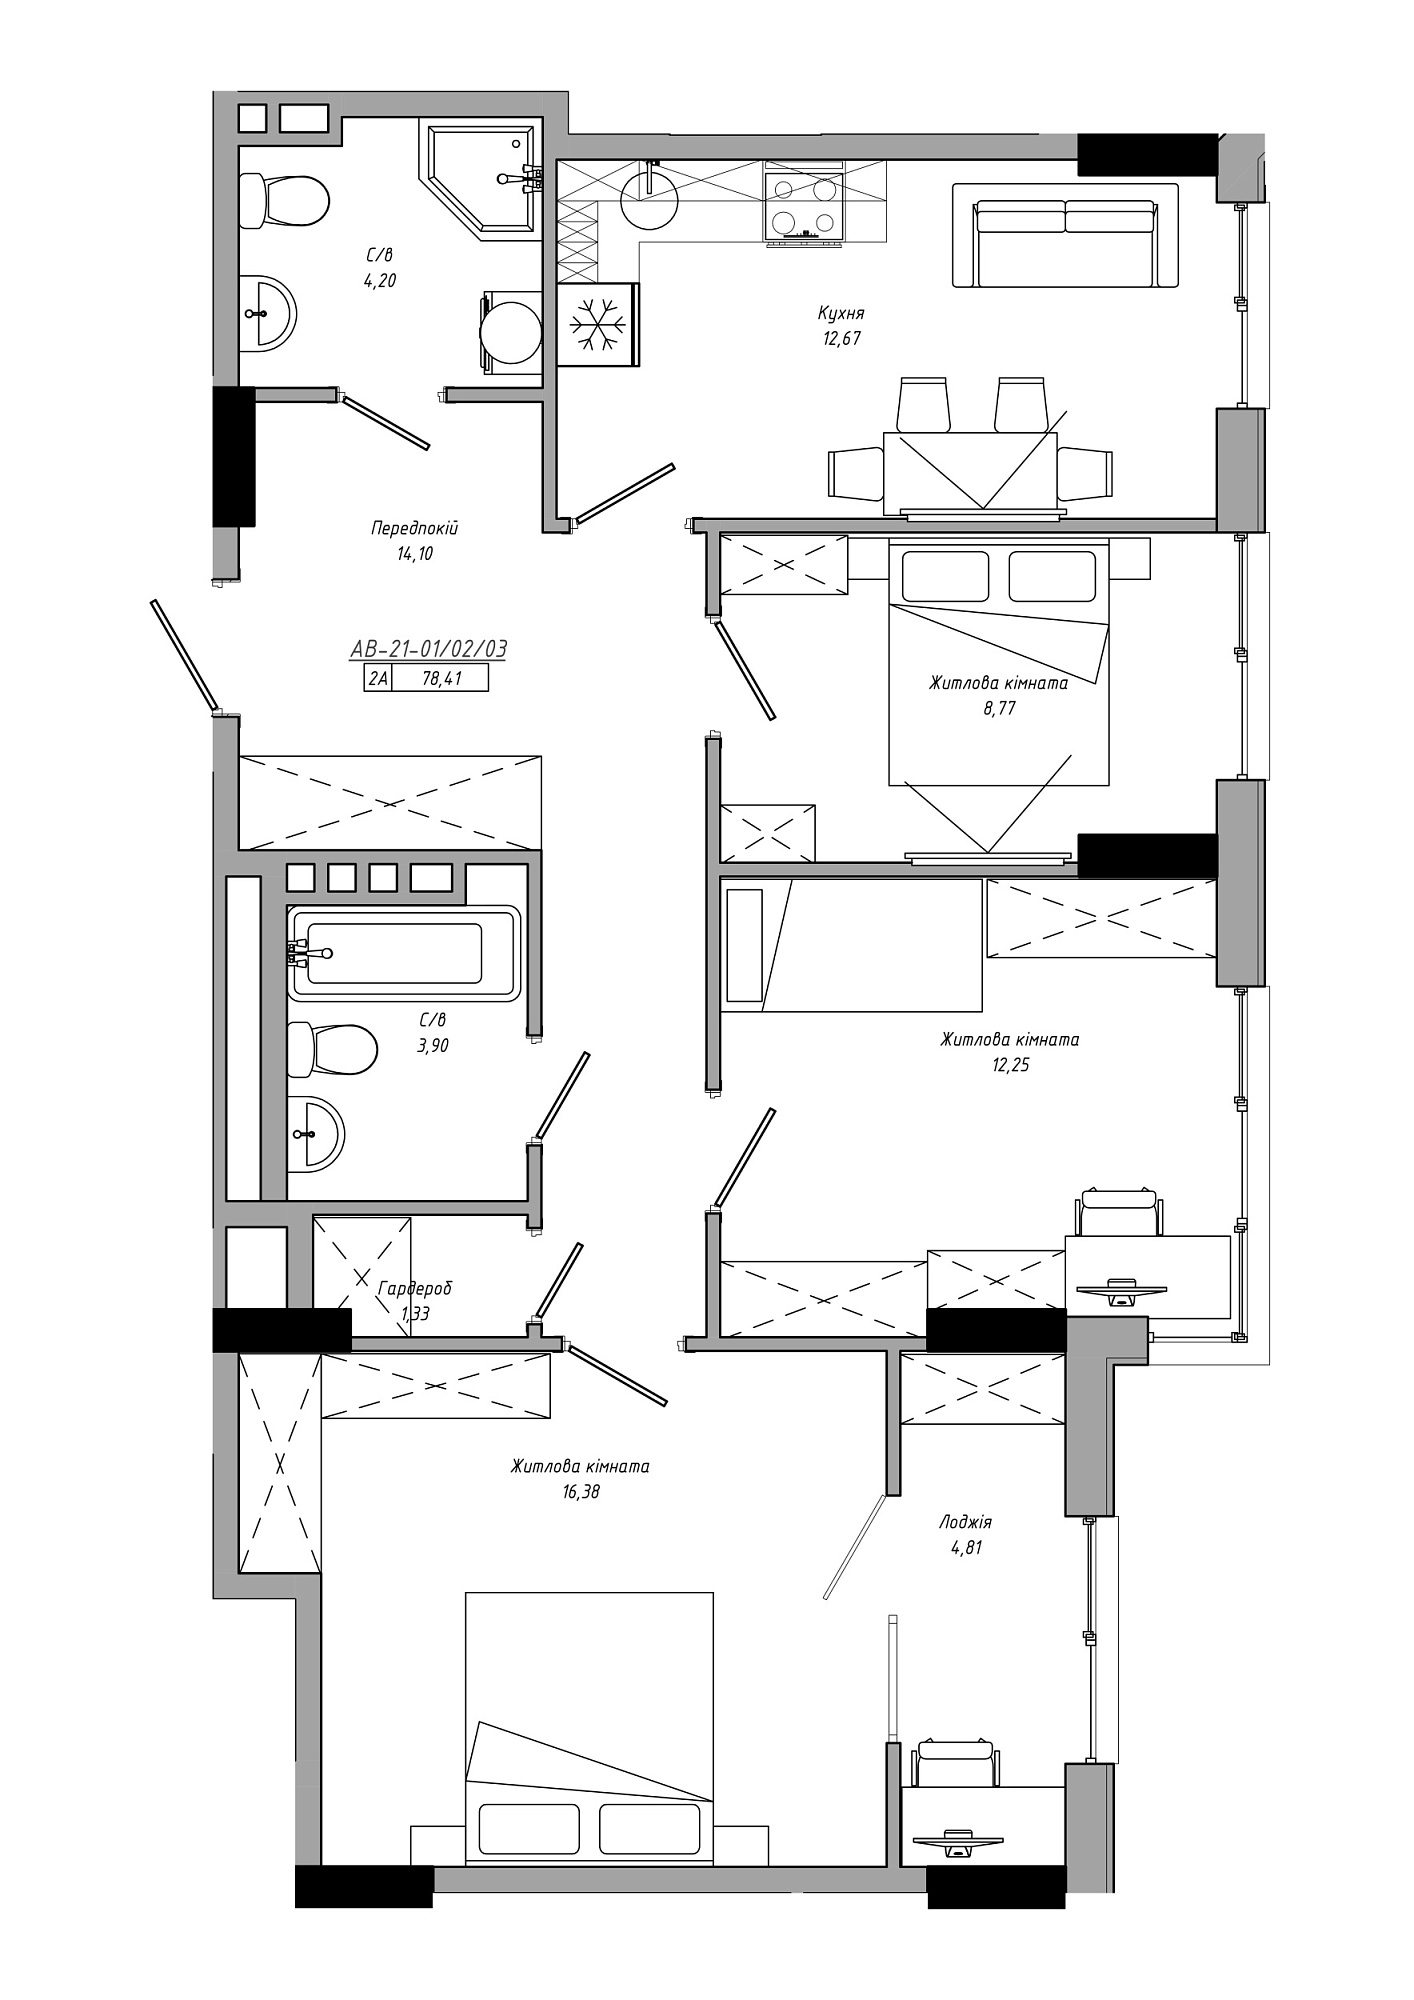 Planning 3-rm flats area 78.41m2, AB-21-01/00002.